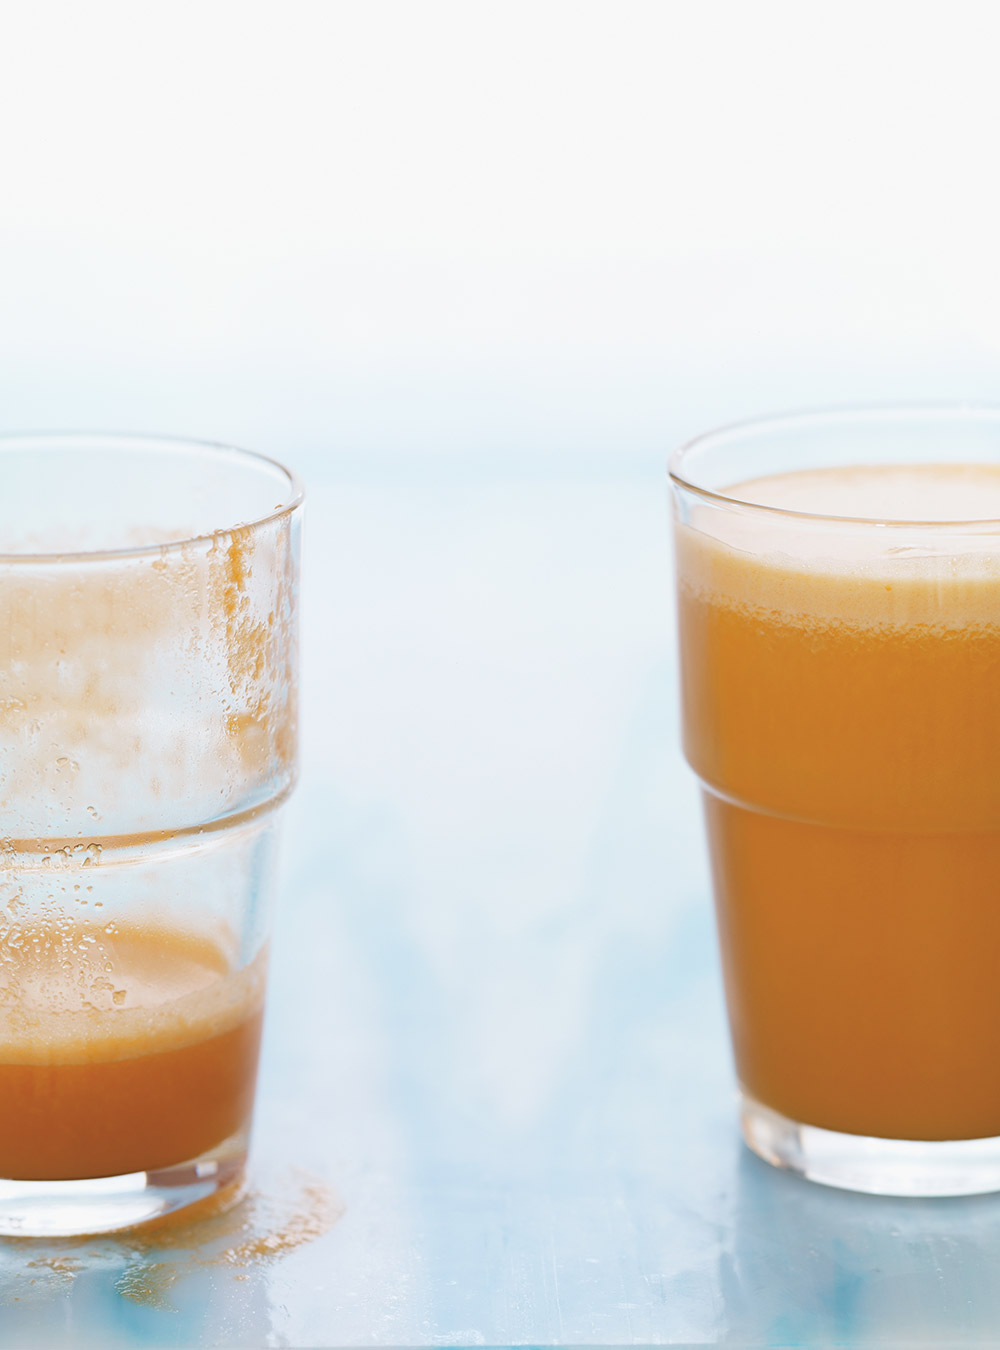 Pineapple, Carrot, and Apple Toning Juice